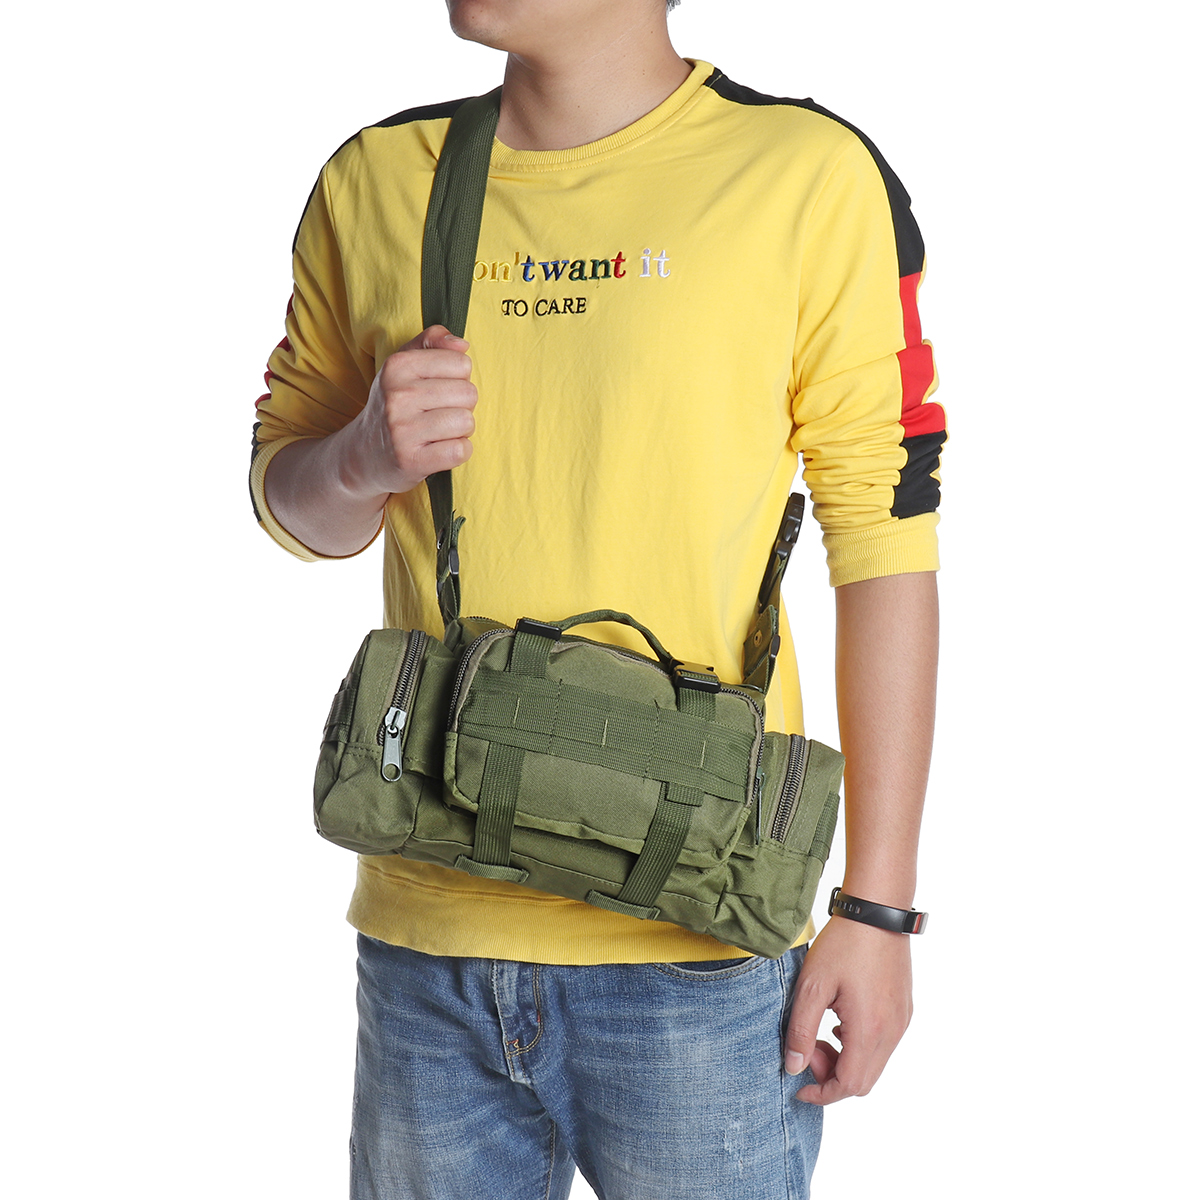 Multifunctional-Outdoor-Sports-Hiking-with-Zippers-Nylon-Oxford-Cloth-Tactical-Shoulder-Bag-Waist-Pa-1825563-28